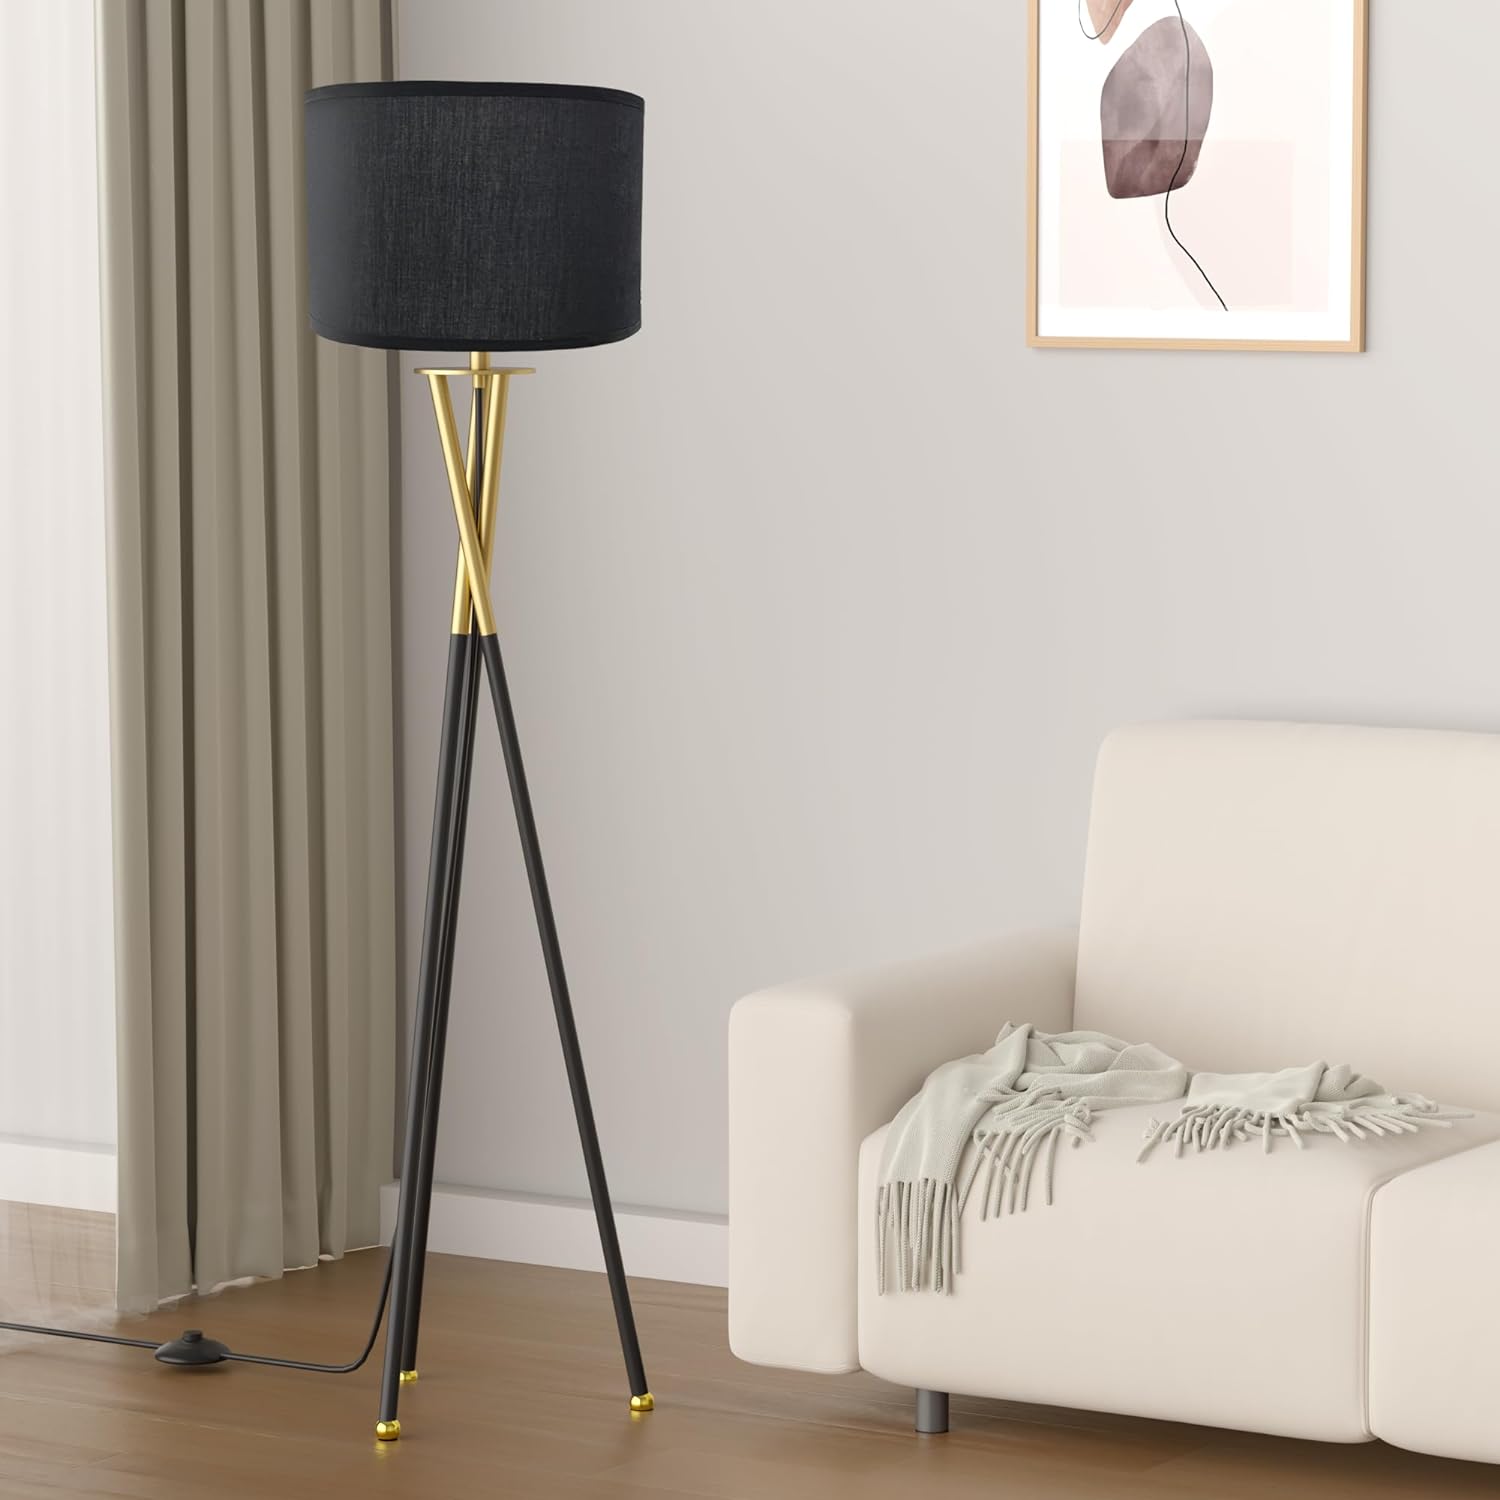 Capon Tripod Floor Lamp for Living Room, Tall Standing Lamp with E26 Bulbs, Beige/Black Linen Shade and 3 Color Temperatures, Ideal for Bedroom, Office, Classroom, Dorm Room and Study Room